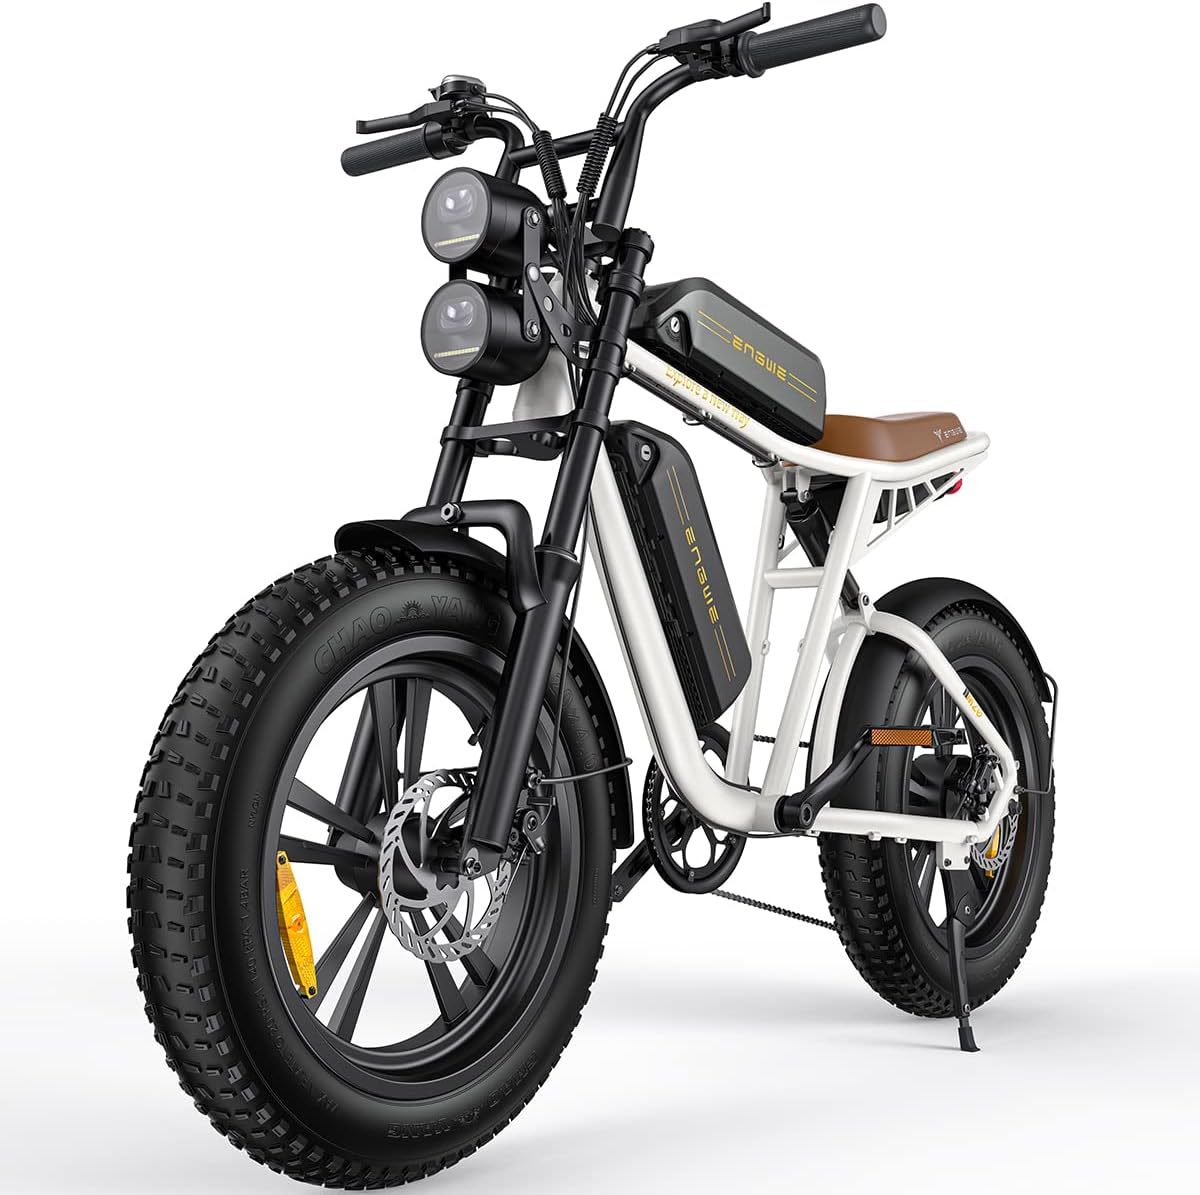 ENGWE M20 Ebikes for Adults - 750W Motor 4.0 * 20" Fat Tire Offroad Cruiser E Motorcycle 28MPH 94Miles Long Range for 48V26A Dual Battery Option,Full Suspension UL Certified, Black